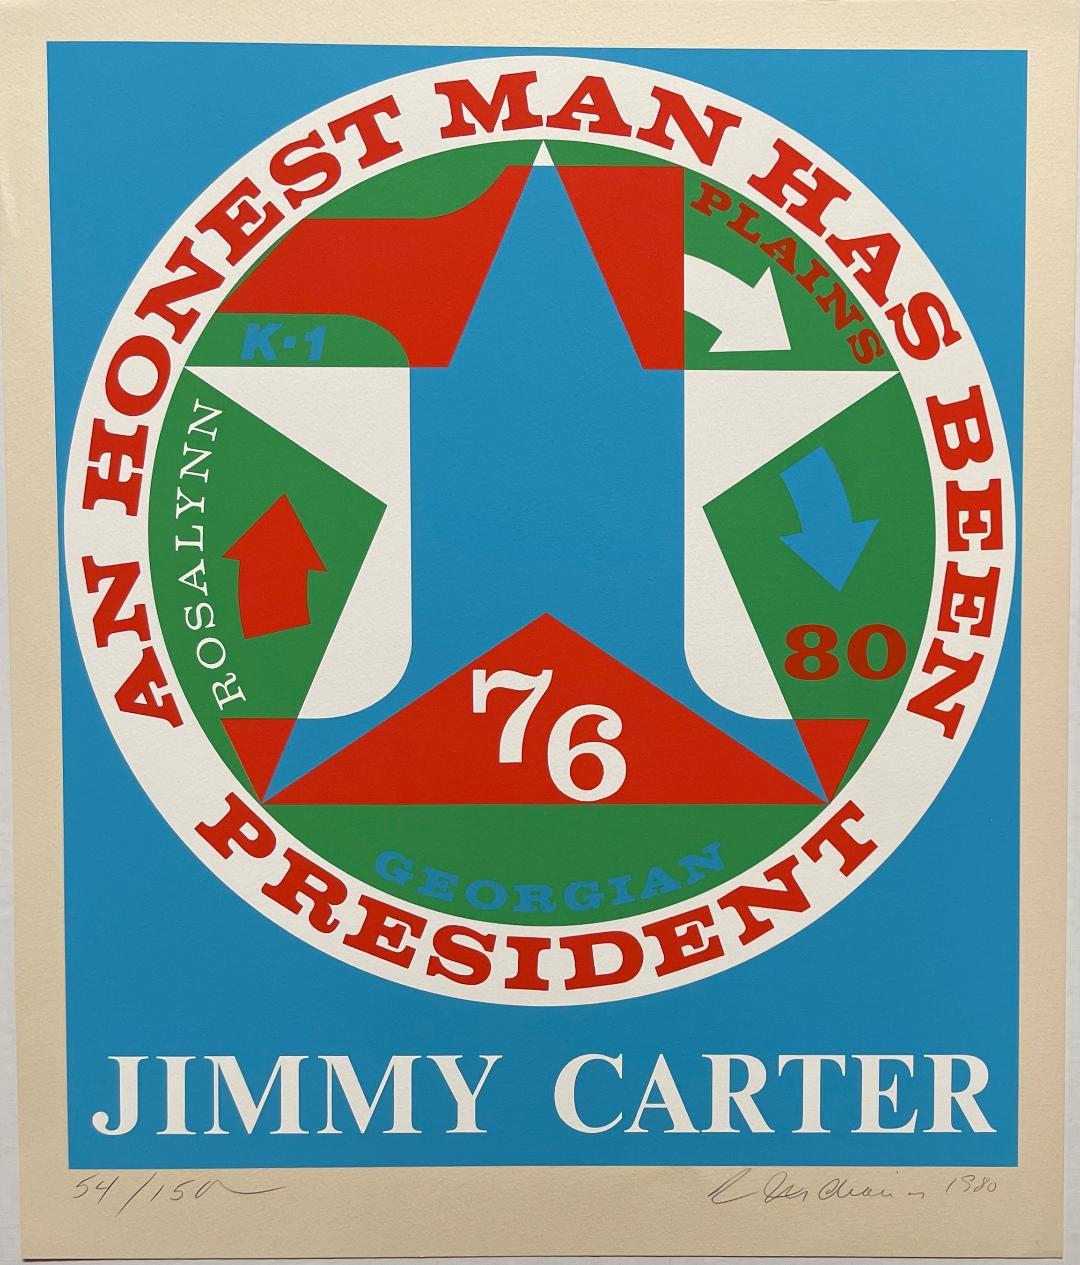 An Honest Man Has Been President: Homage to Jimmy Carter (Sheehan, 112) - Print by Robert Indiana